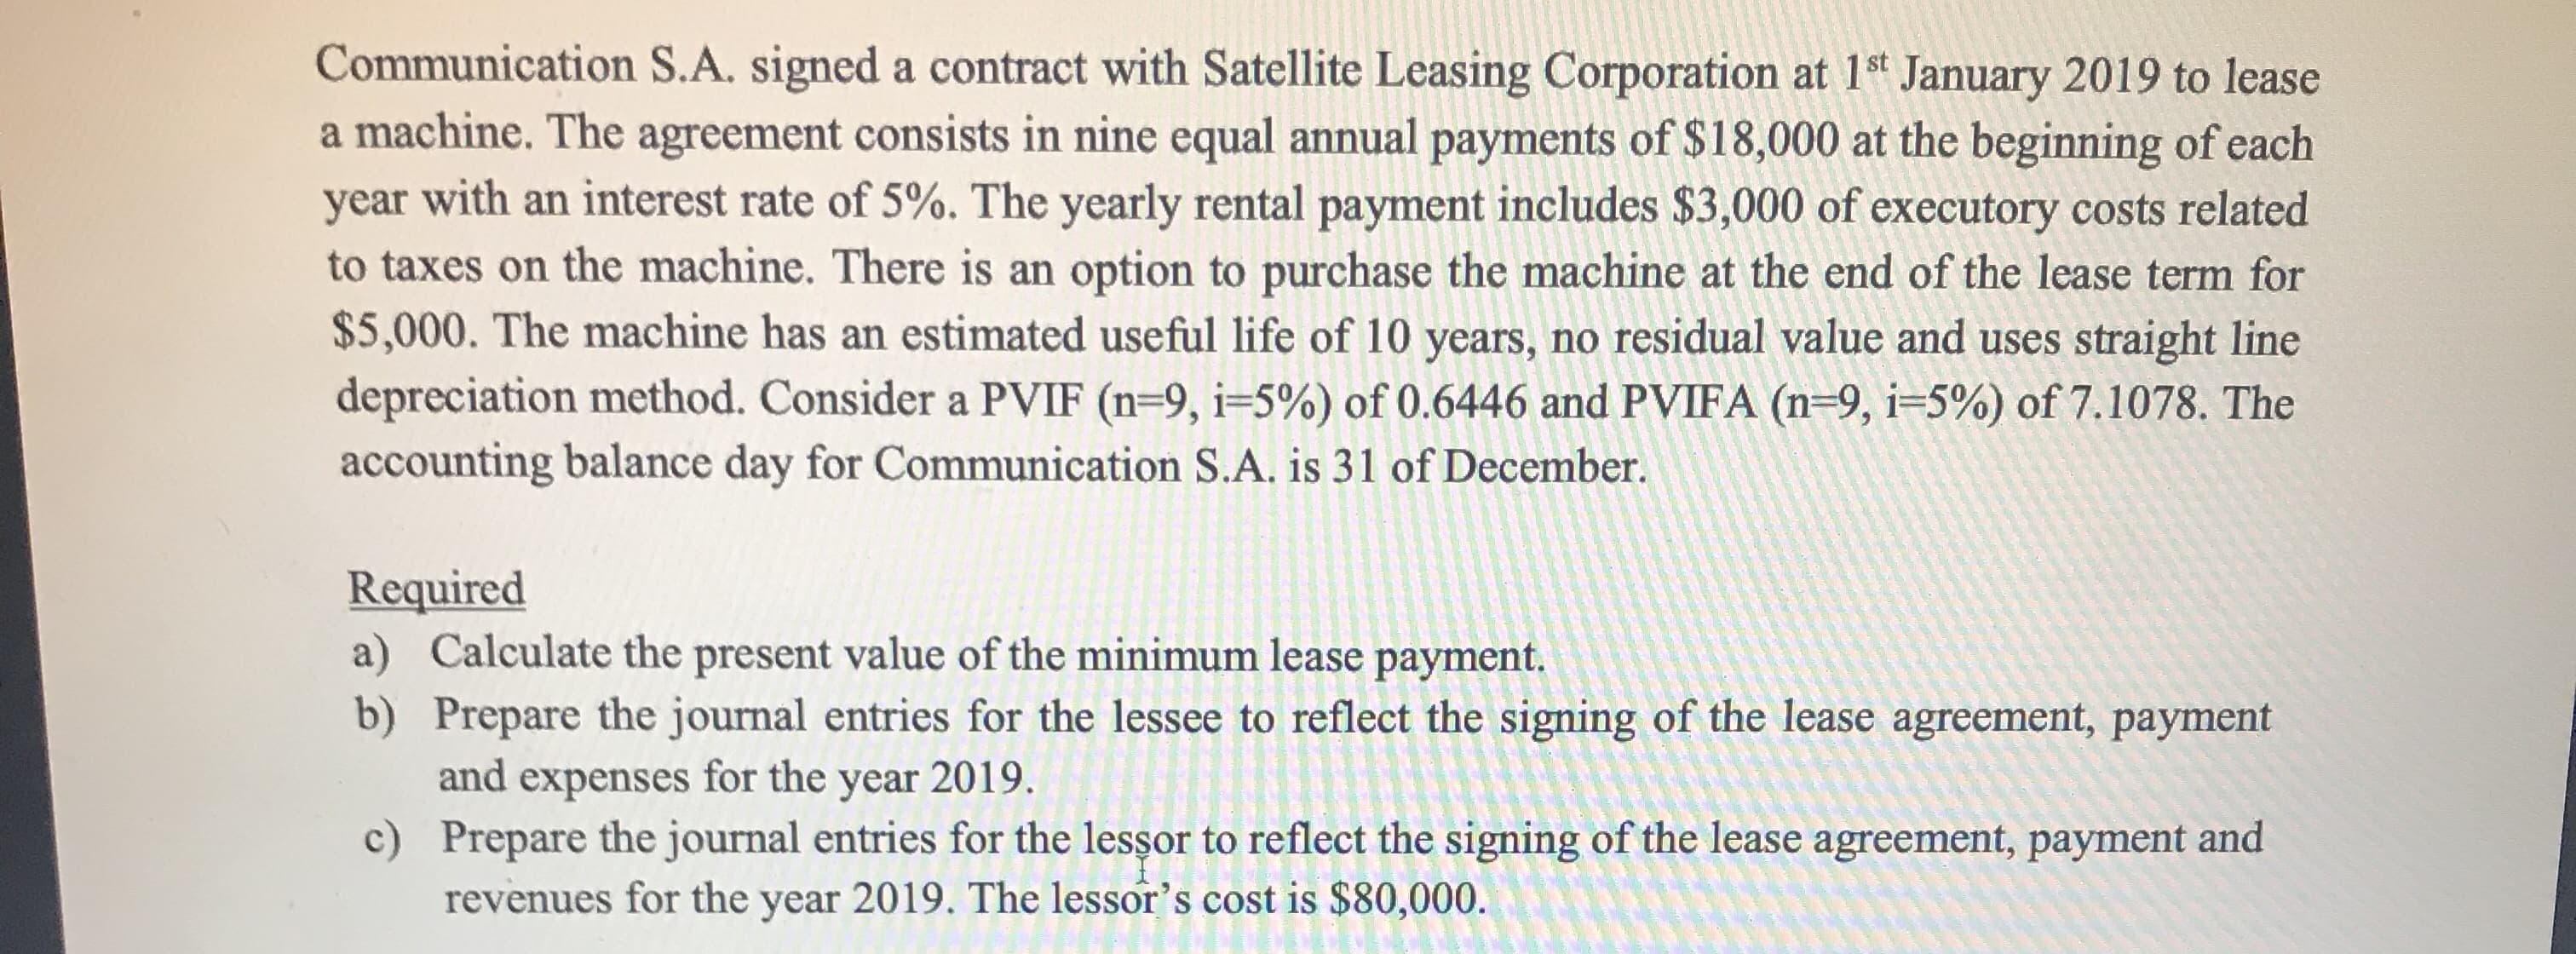 Communication S.A. signed a contract with Satellite Leasing Corporation at 1st January 2019 to lease
a machine. The agreement consists in nine equal annual payments of $18,000 at the beginning of each
year with an interest rate of 5%. The yearly rental payment includes $3,000 of executory costs related
to taxes on the machine. There is an option to purchase the machine at the end of the lease term for
$5,000. The machine has an estimated useful life of 10 years, no residual value and uses straight line
depreciation method. Consider a PVIF (n=9, i=5%) of 0.6446 and PVIFA (n=9, i=5%) of 7.1078. The
accounting balance day for Communication S.A. is 31 of December.
Required
a) Calculate the present value of the minimum lease payment.
b) Prepare the journal entries for the lessee to reflect the signing of the lease agreement, payment
and expenses for the year 2019.
c) Prepare the journal entries for the lessor to reflect the signing of the lease agreement, payment and
revenues for the year 2019. The lessor's cost is $80,000.
